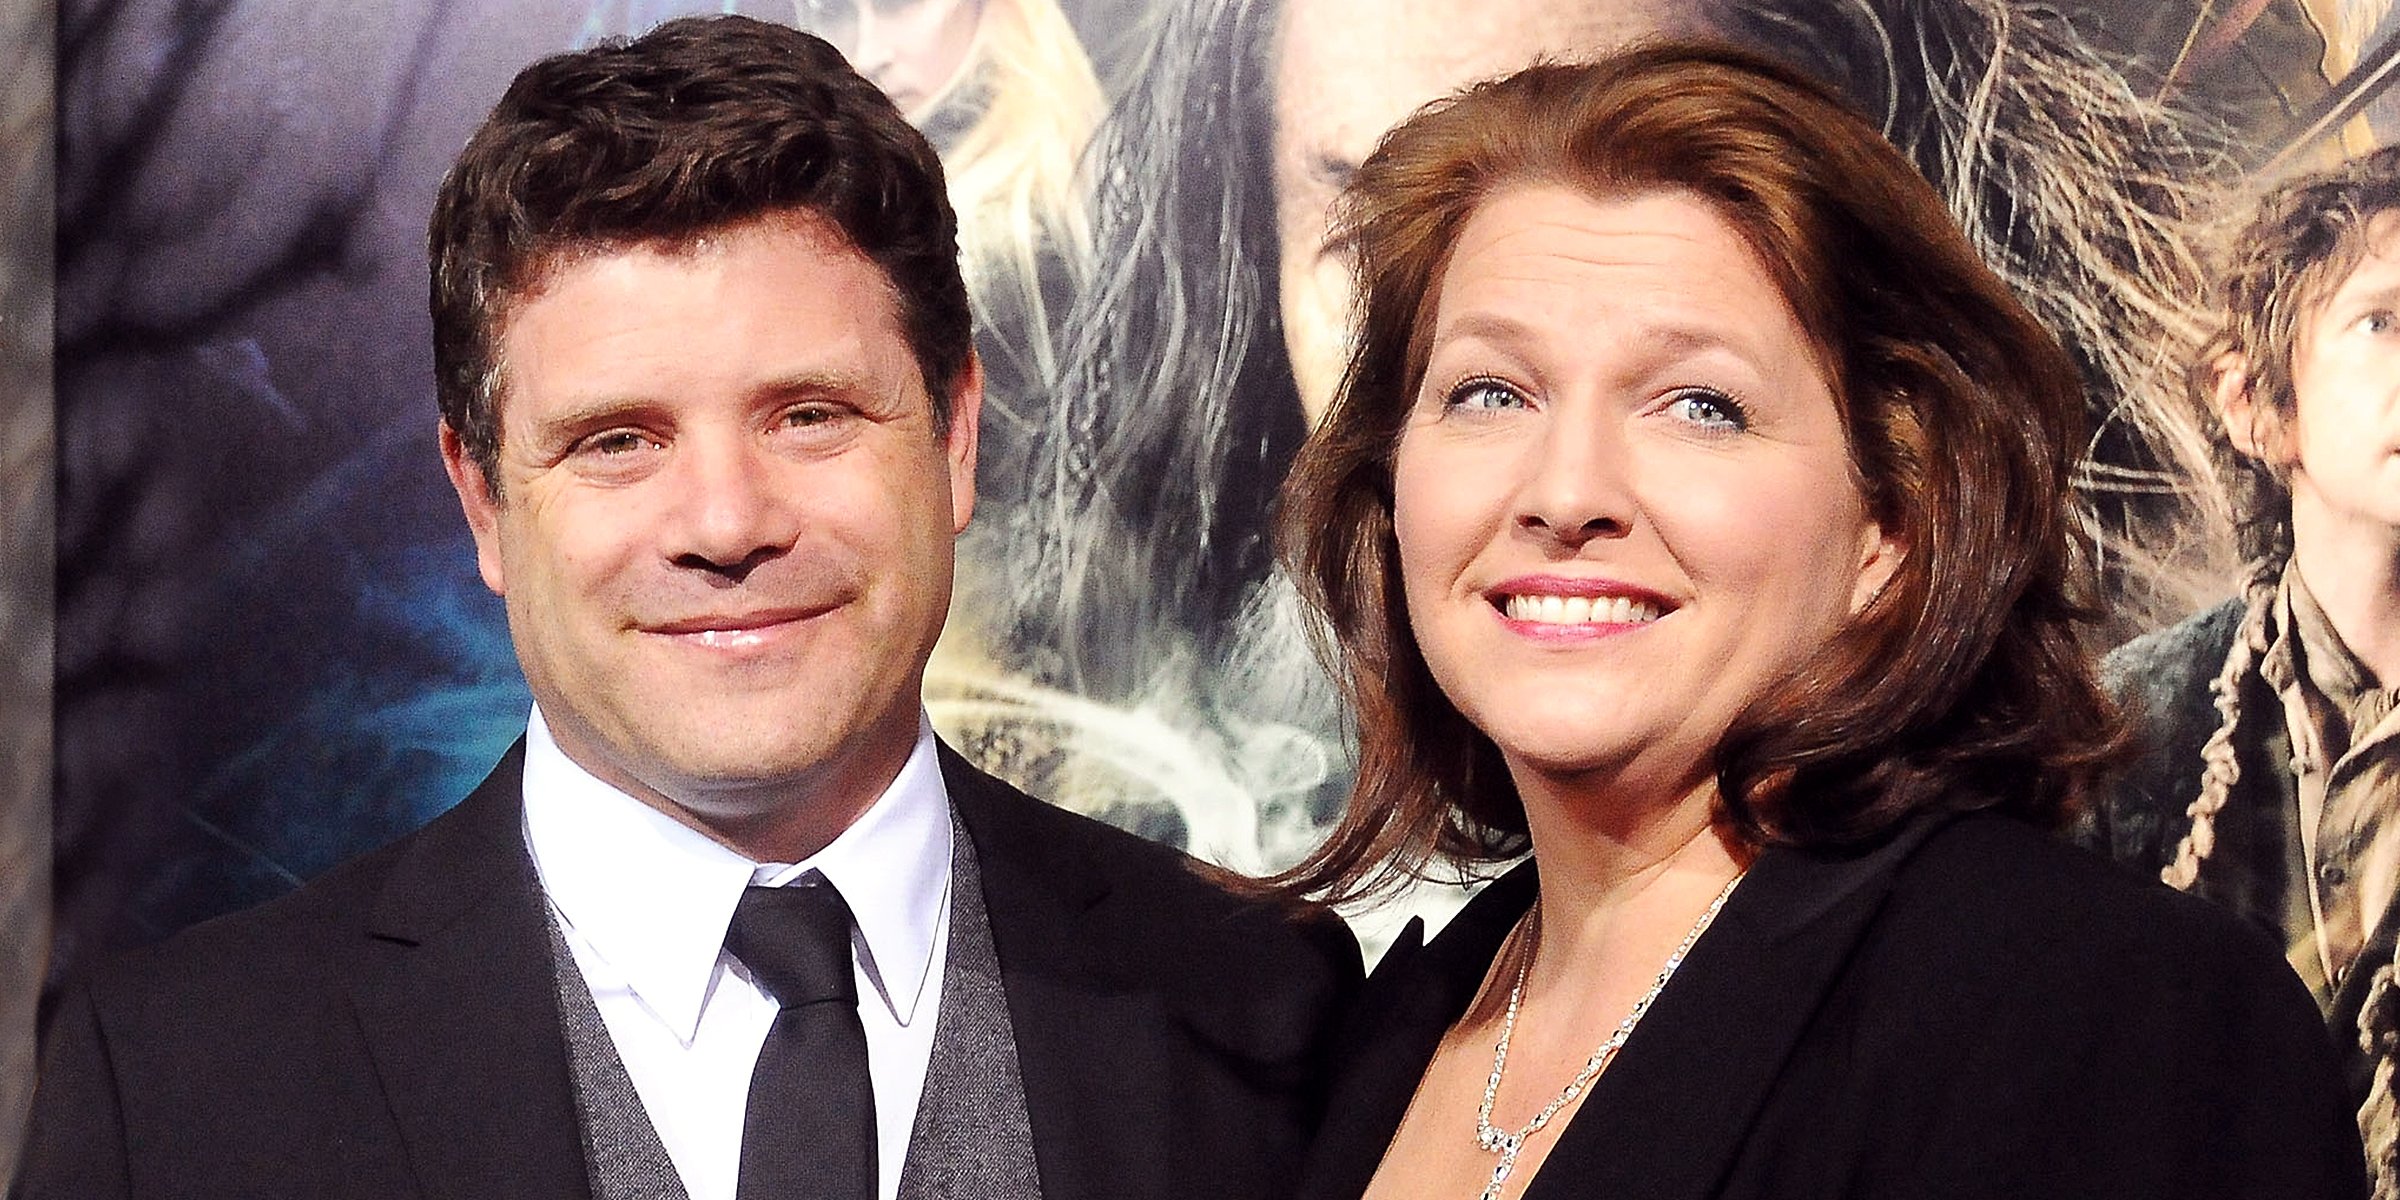 Sean Astin and Christine Astin (née Harrell) | Source: etty Images